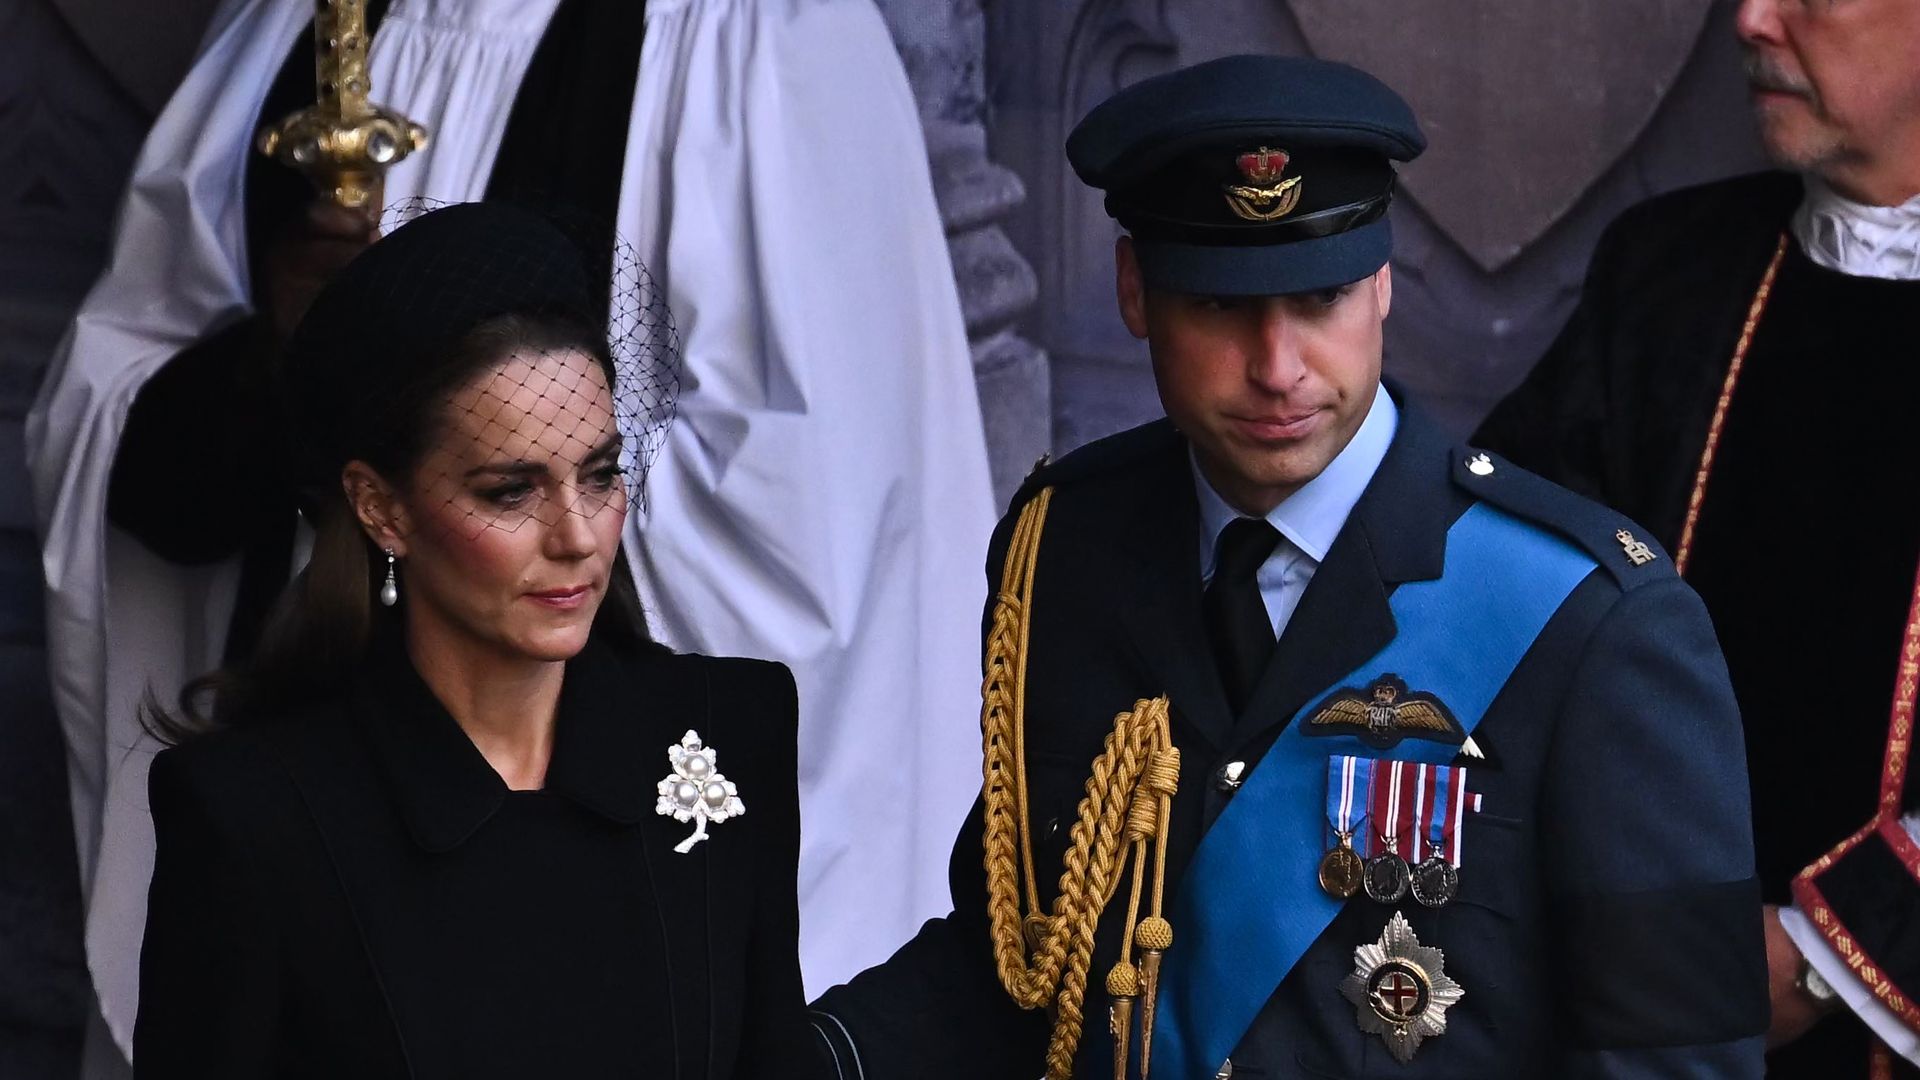 Kate Middleton in black dress with Prince William in military dress